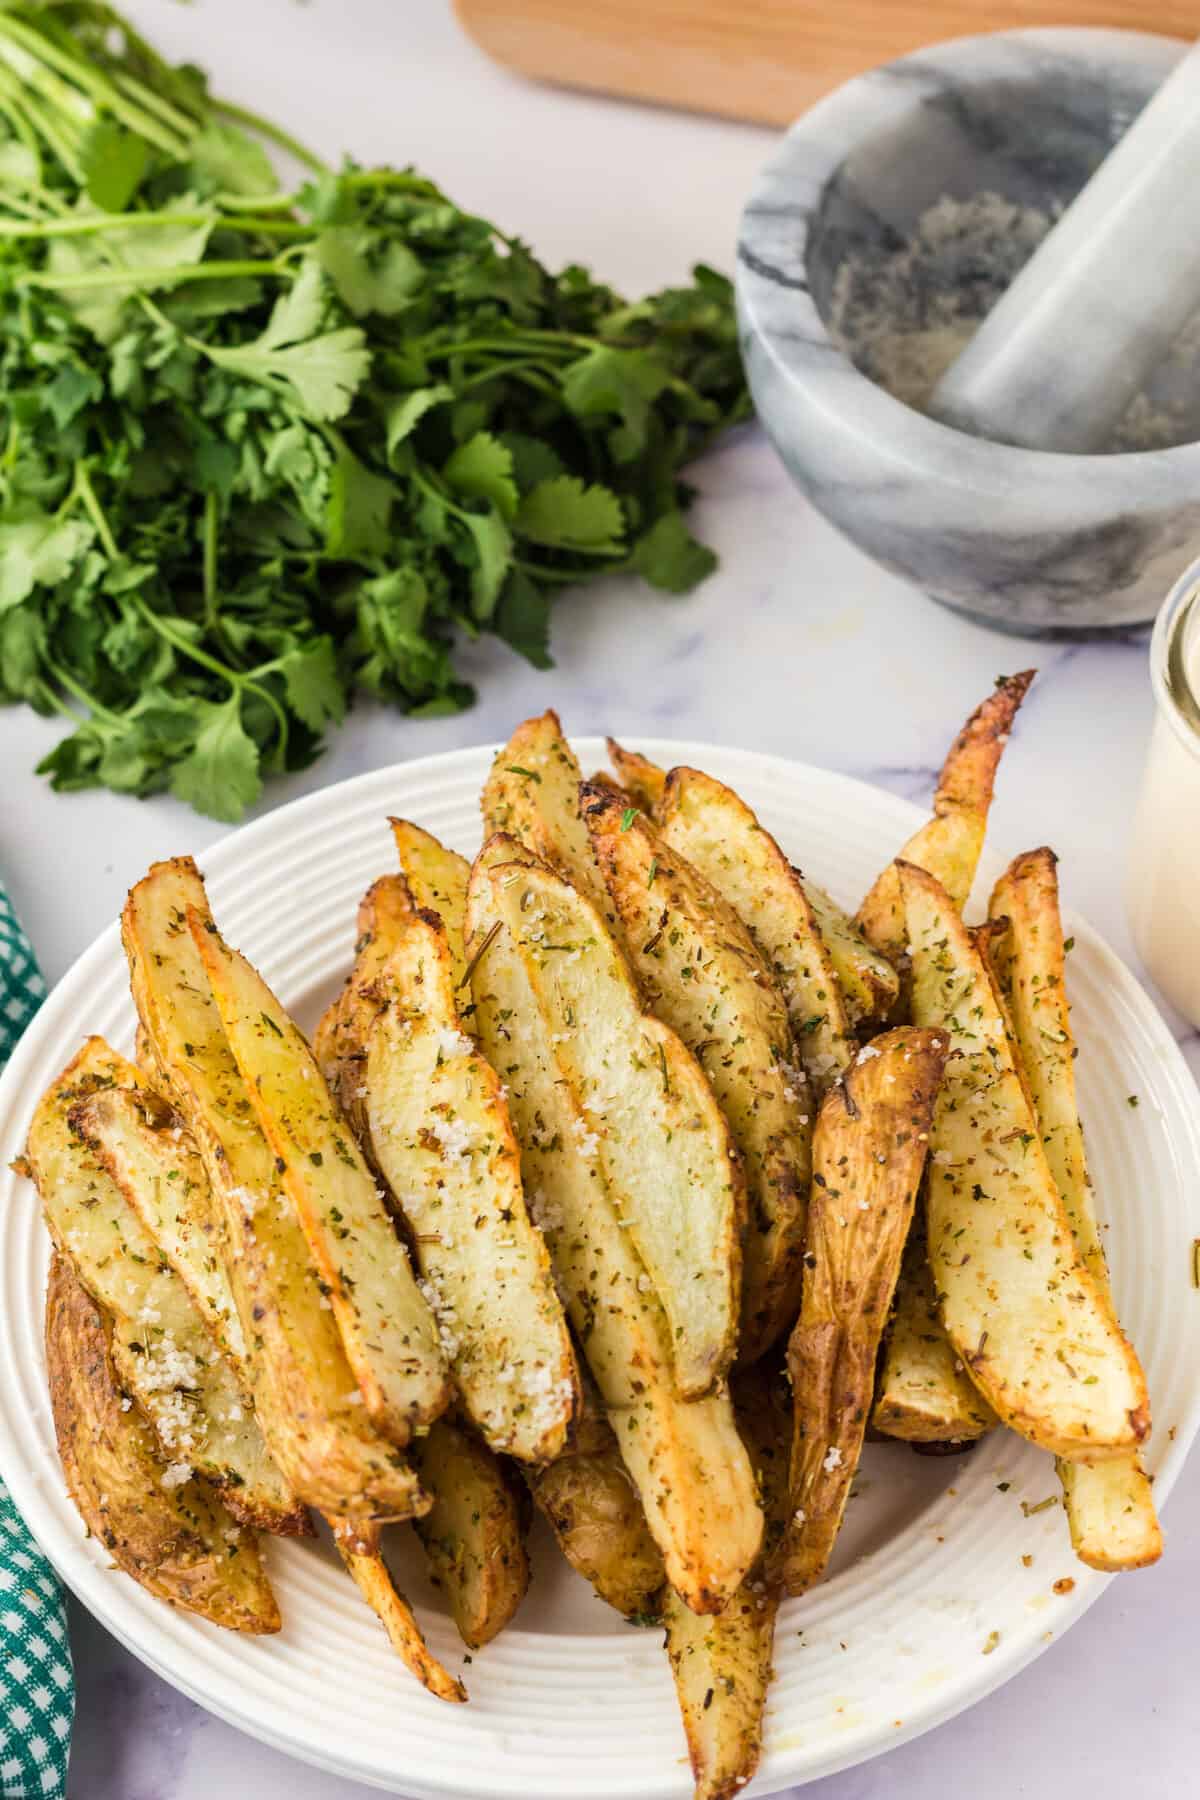 garlic and herb roasted potato wedges on a white plate.